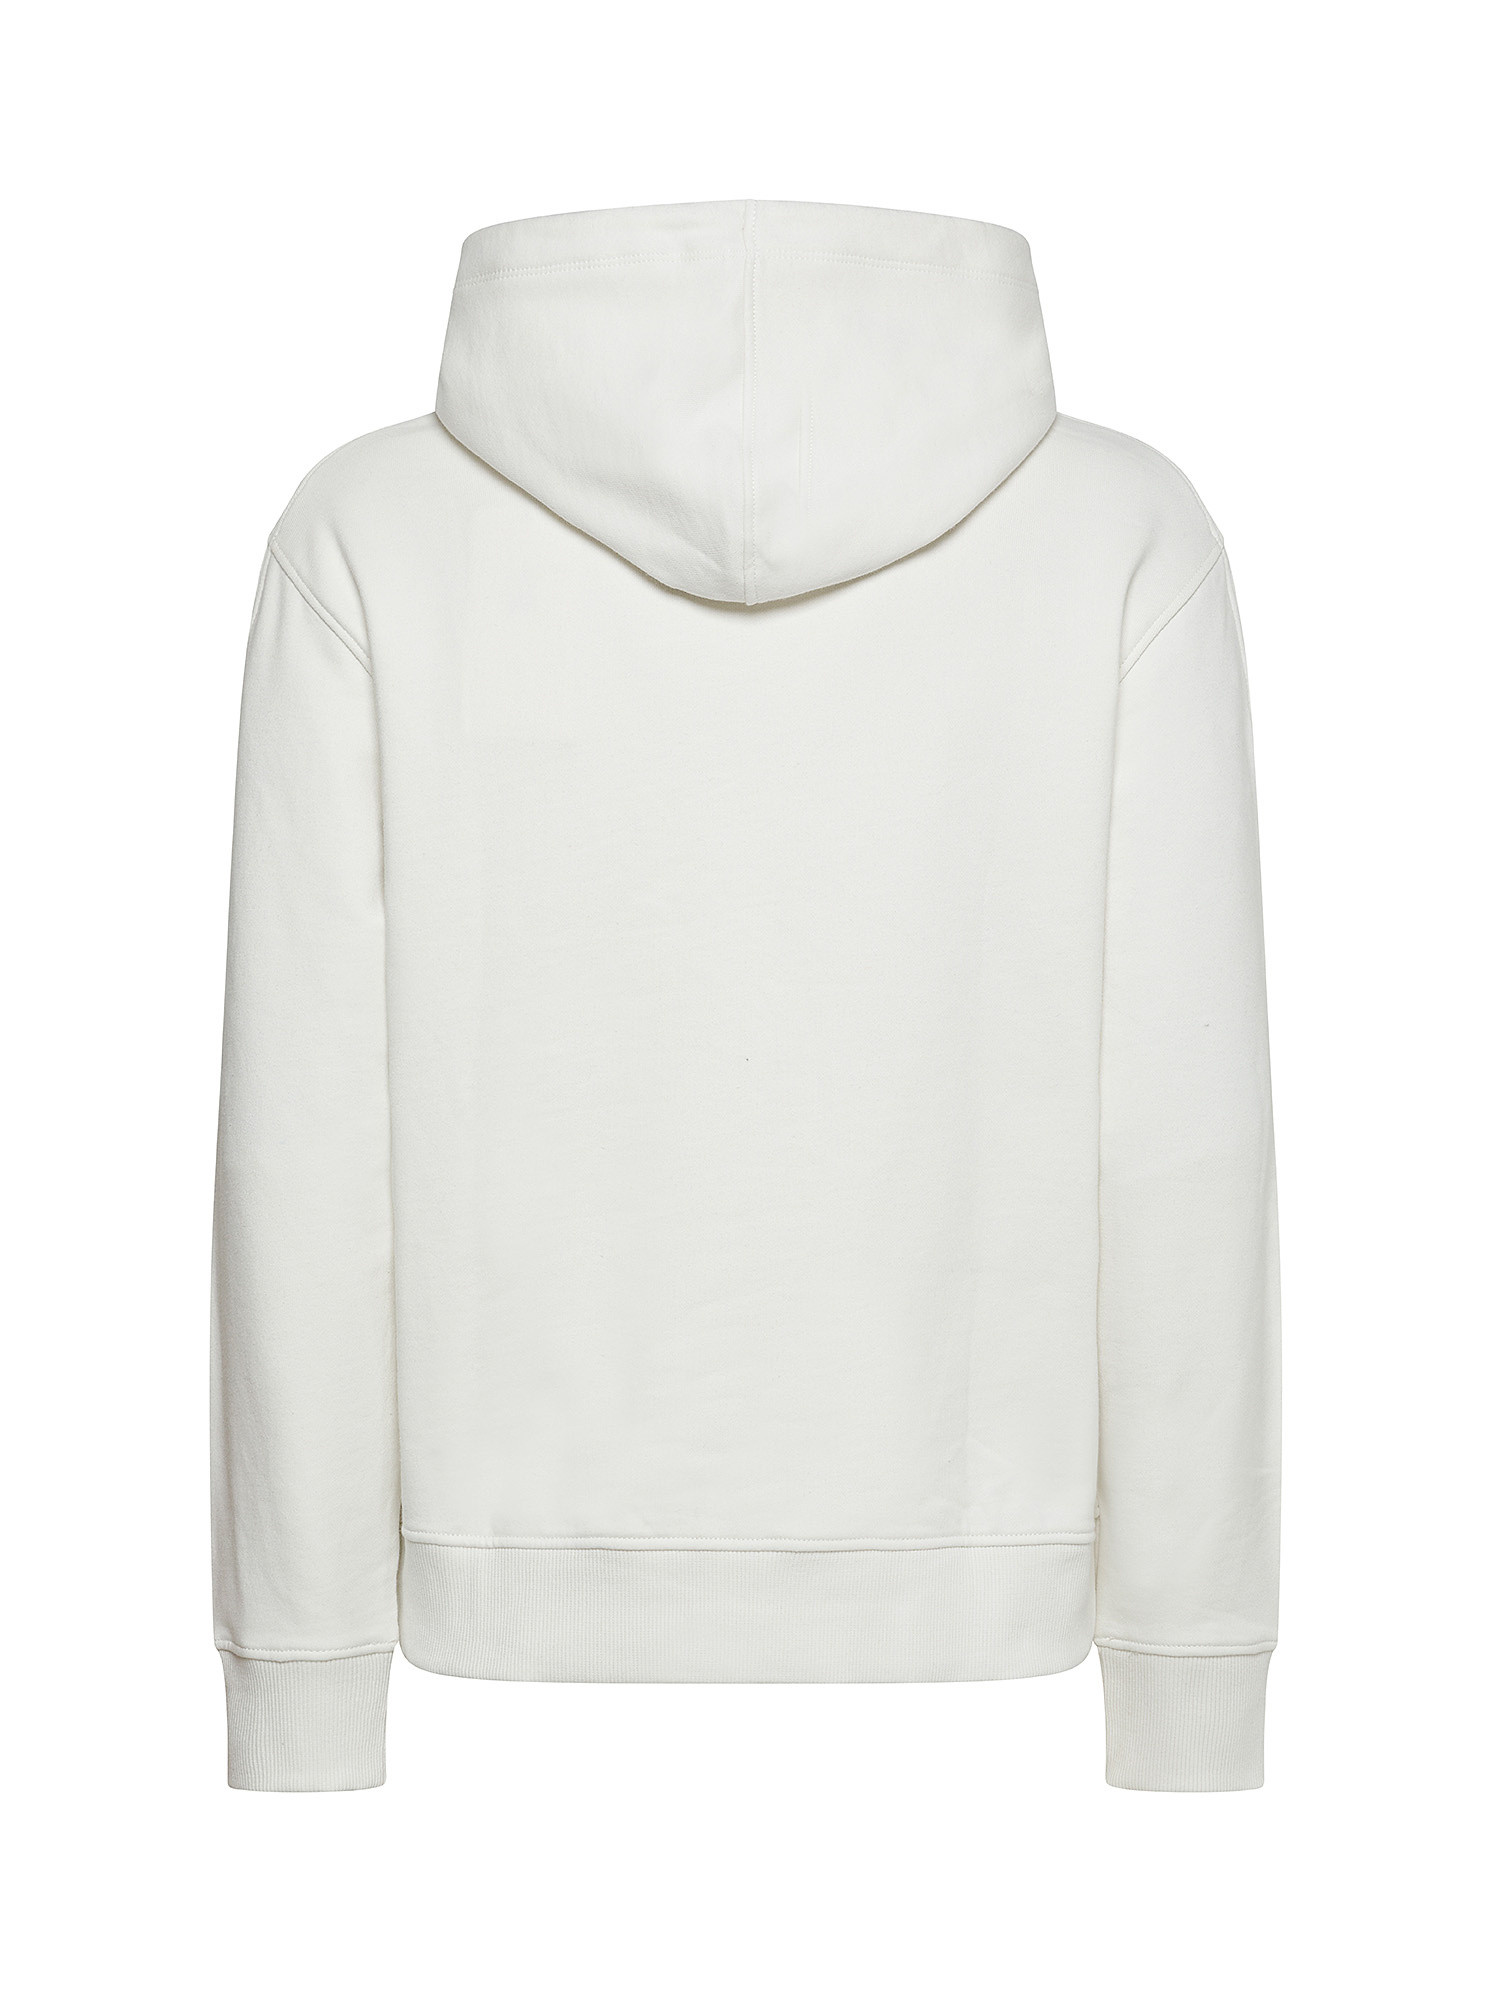 Calvin Klein Jeans - Relaxed fit sweatshirt in cotton with logo, White, large image number 1